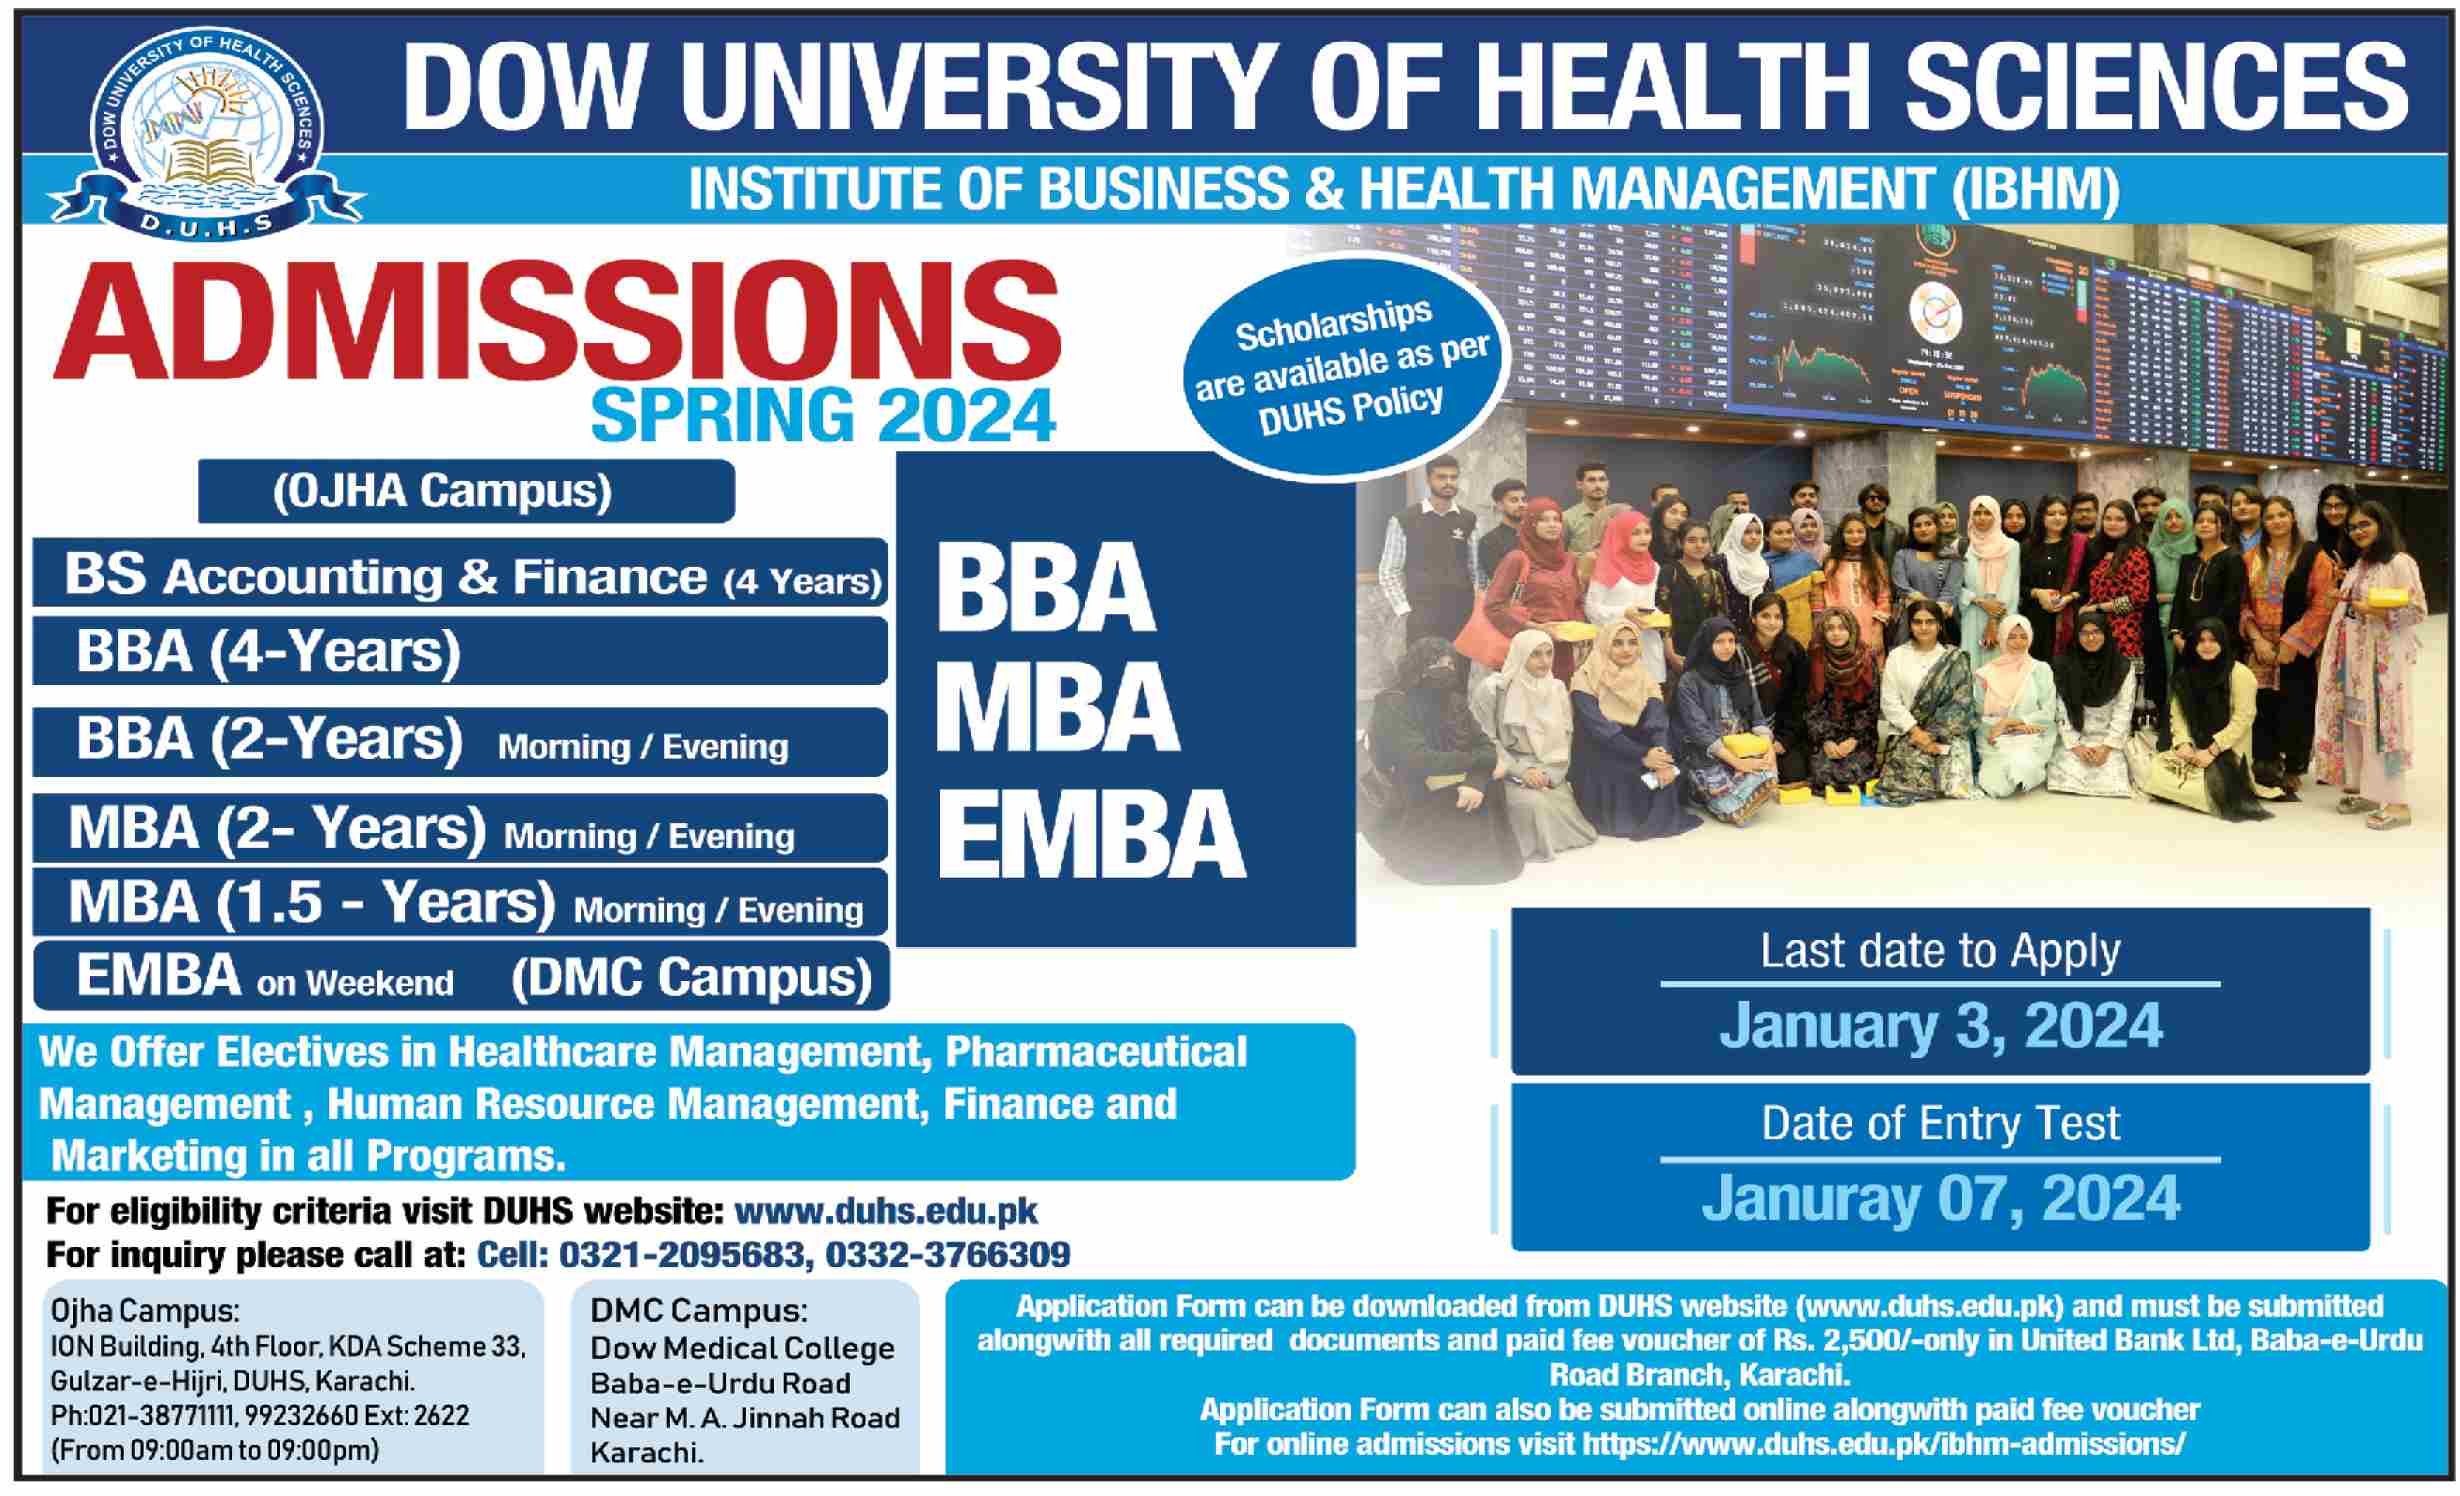 DOW University of Health Sciences IBHM Admissions Spring 2024